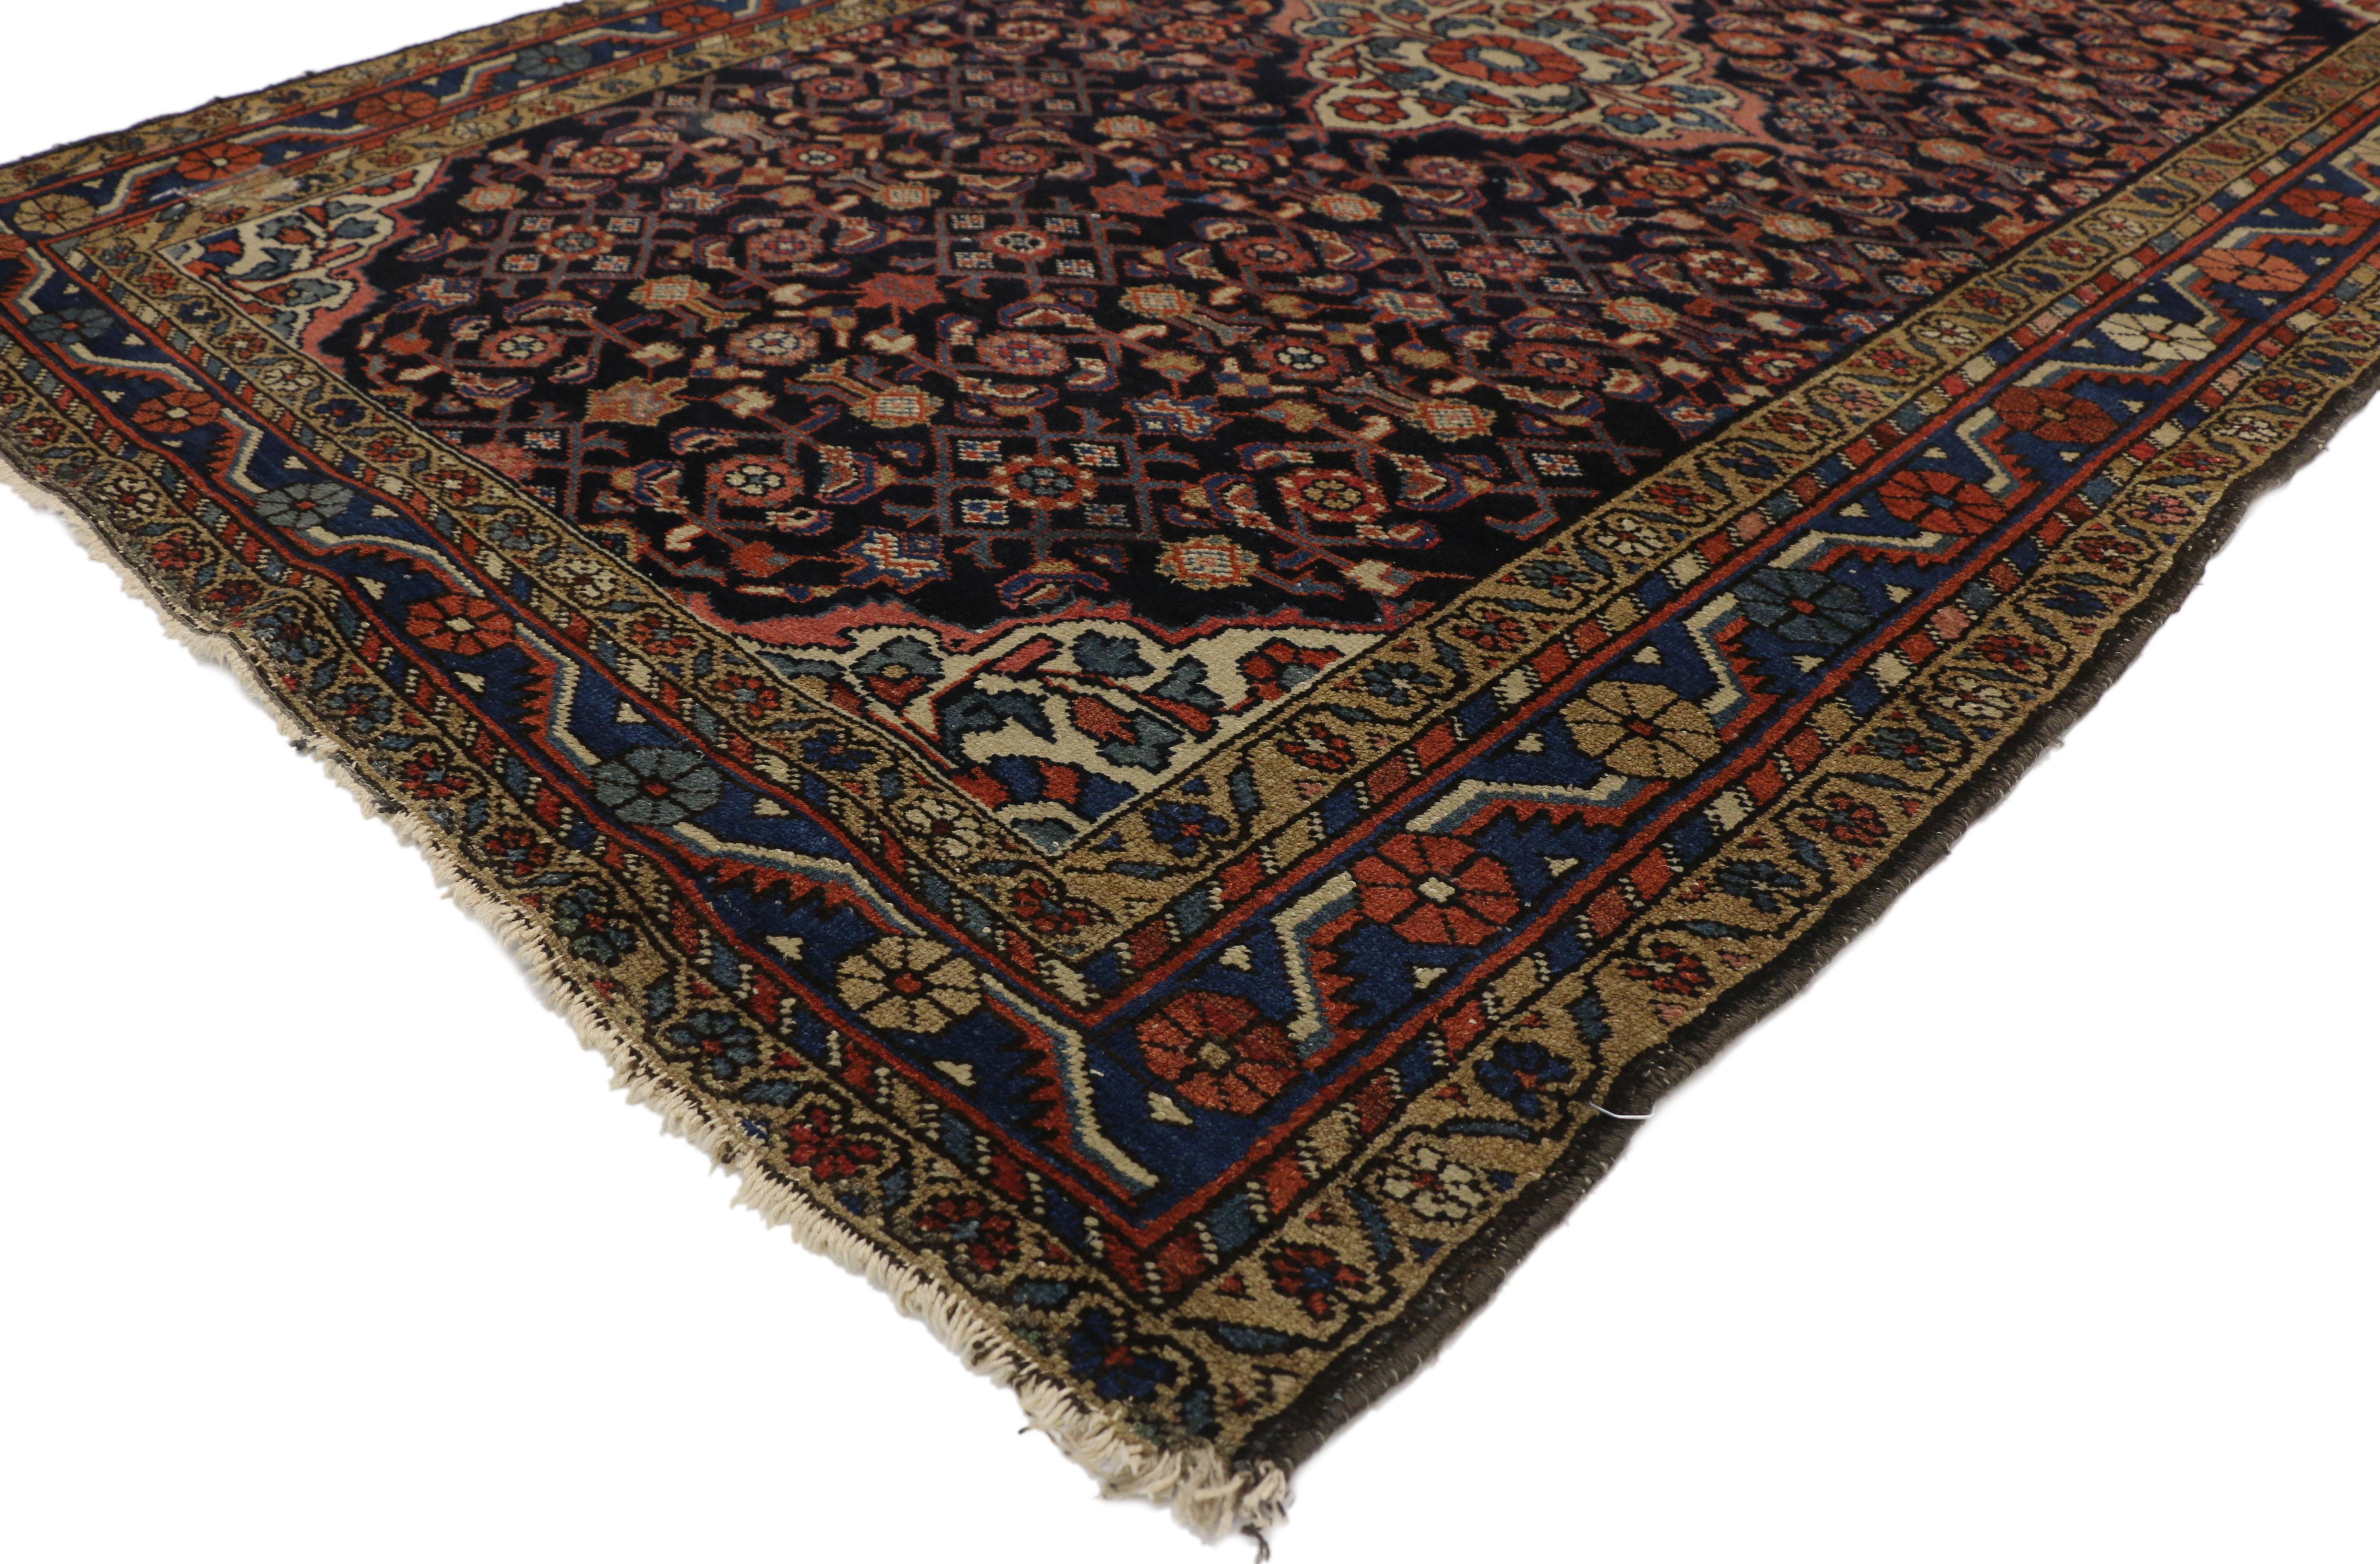 73277 Antique Hamadan Persian Rug with Herati Design. Providing an element of comfort, artistic statement and functional versatility, this antique Hamadan Persian rug with Herati design creates a quiet sophistication and soothing elegance.